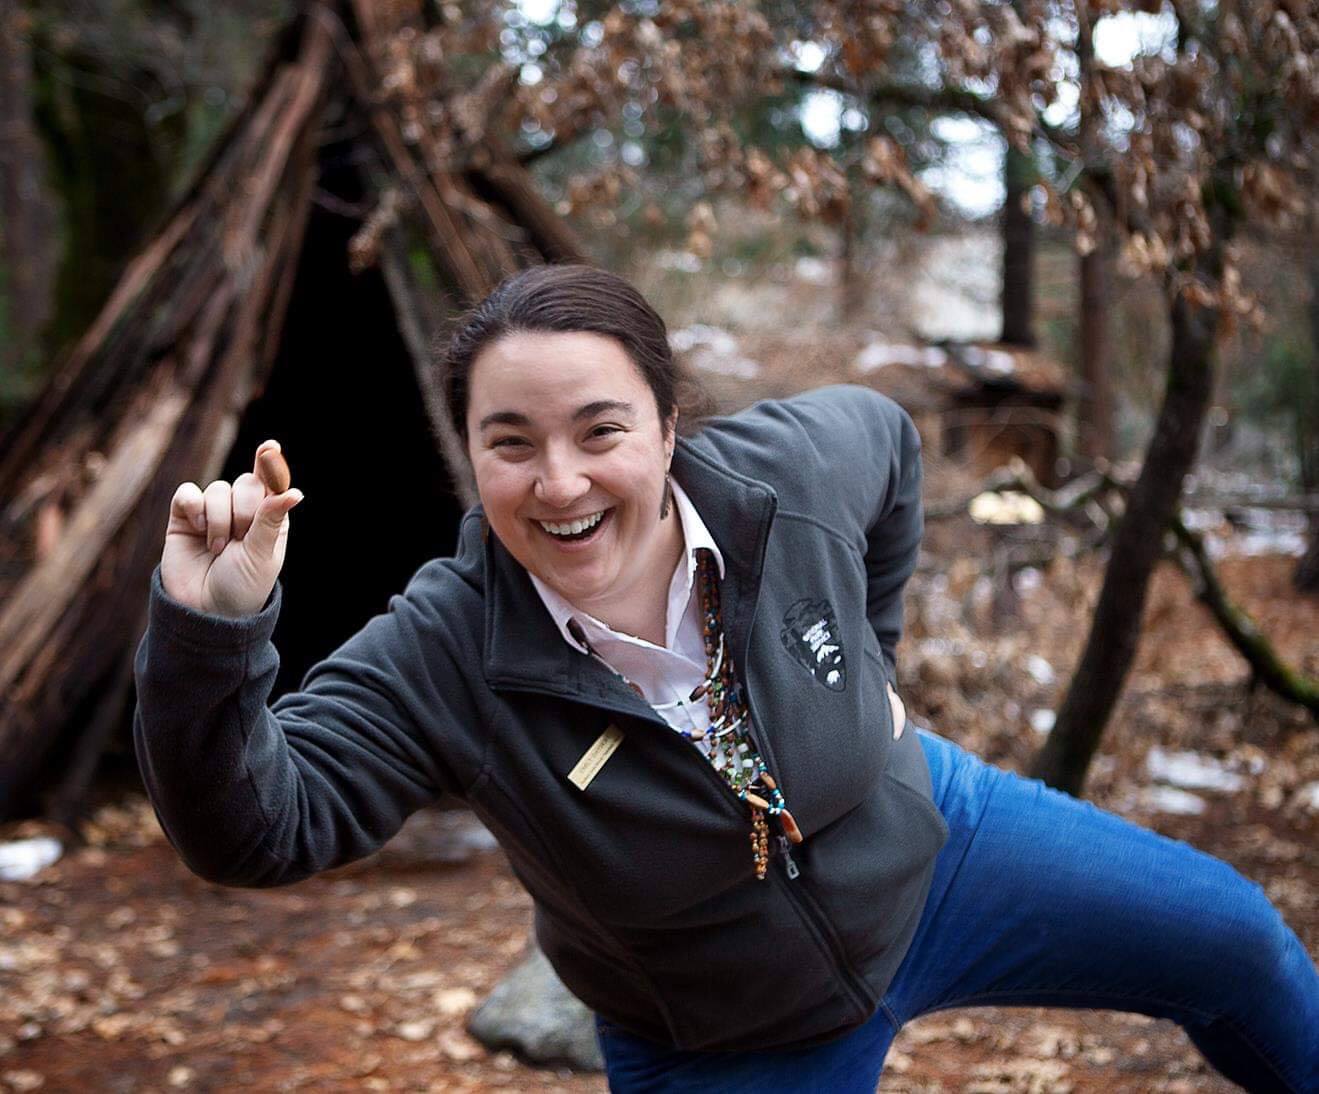 Woman in an excited pose holding an acorn; bark house in the background